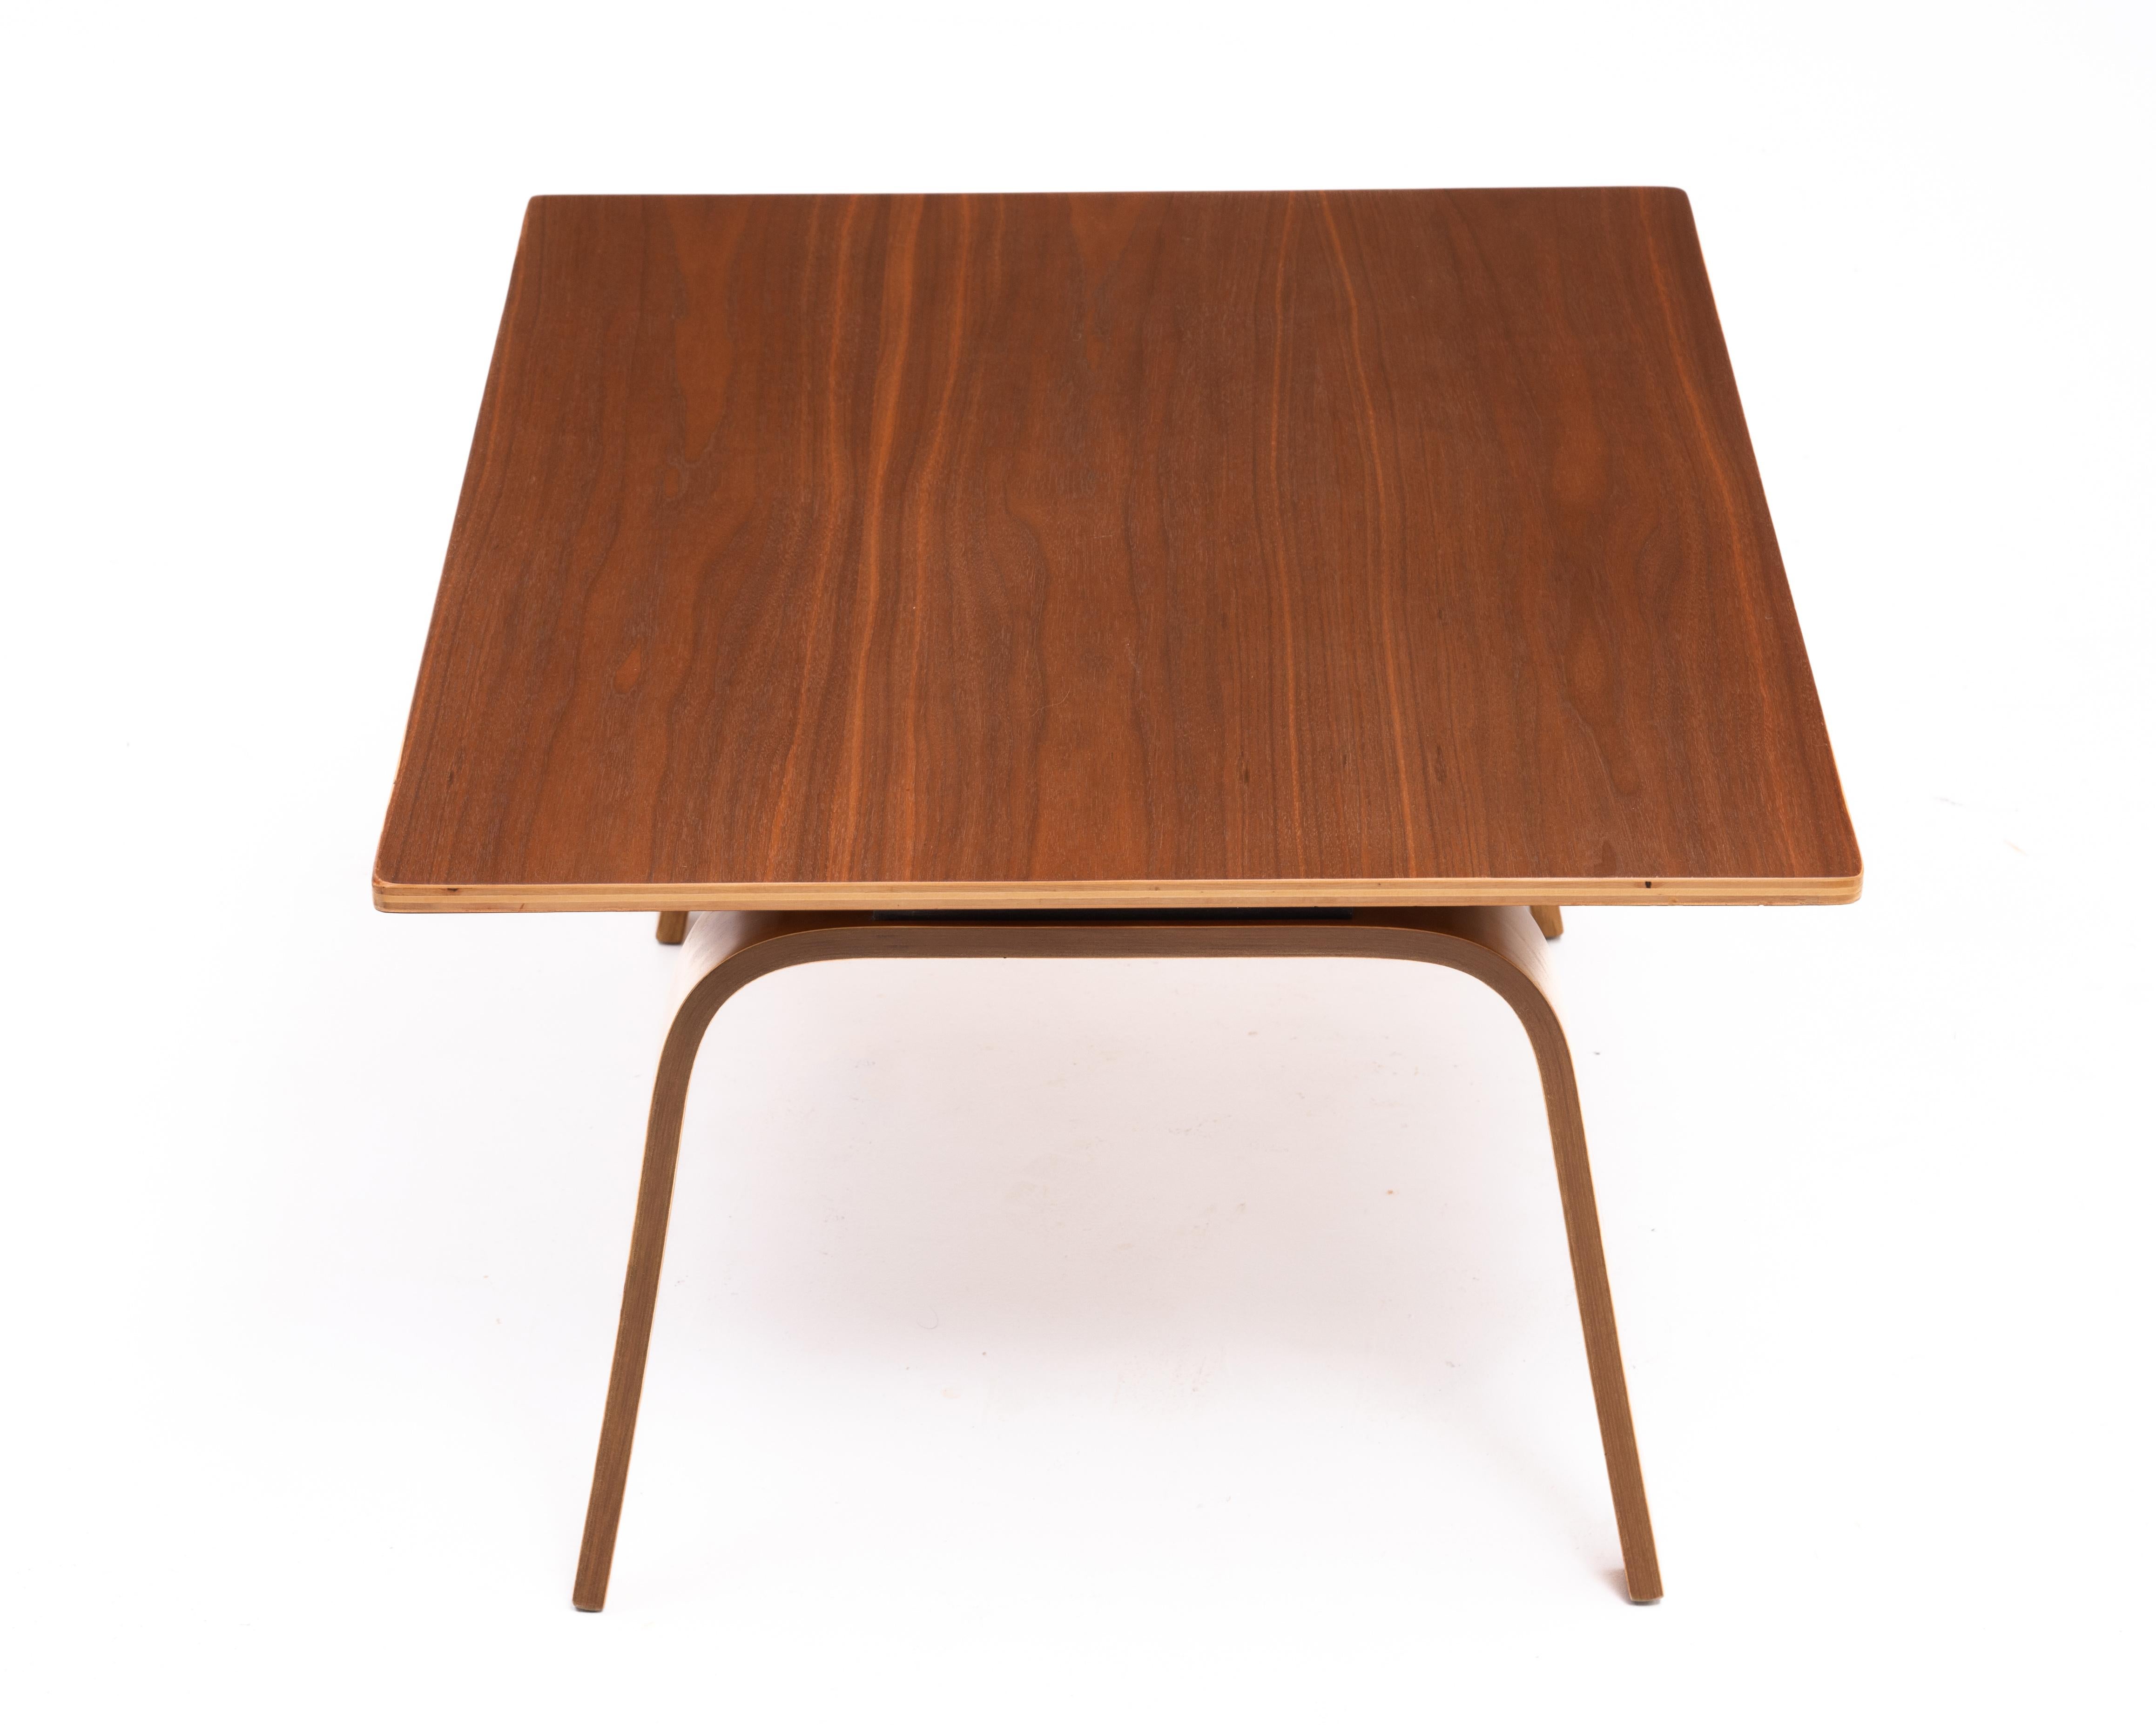 Charles Ray Eames Evans Plywood Company CTW1 OTW Oblong Table Wood Walnut Birch For Sale 4